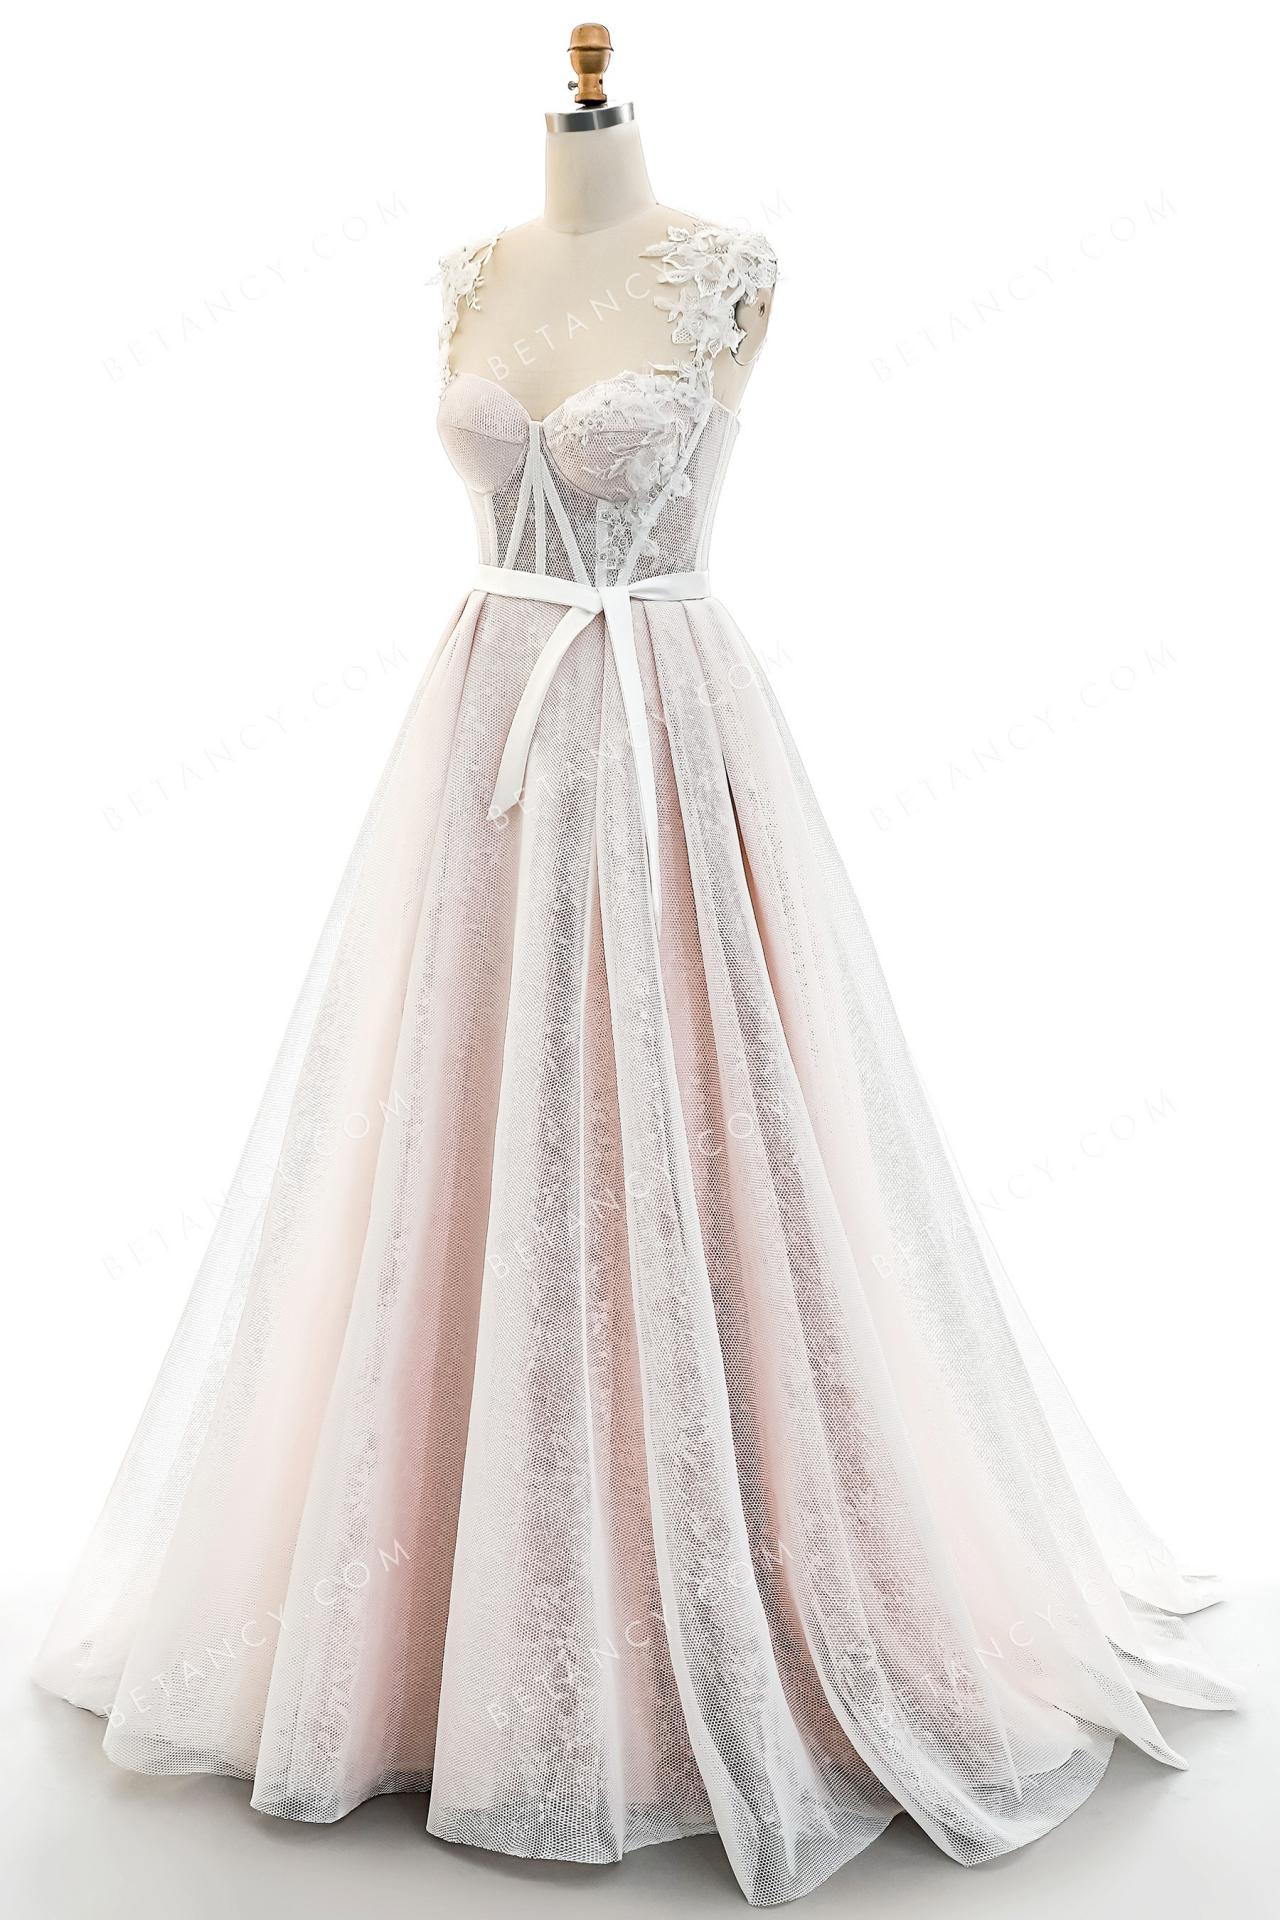 Ethereal floral appliqued sweetheart pink tulle wedding dress 8 1 